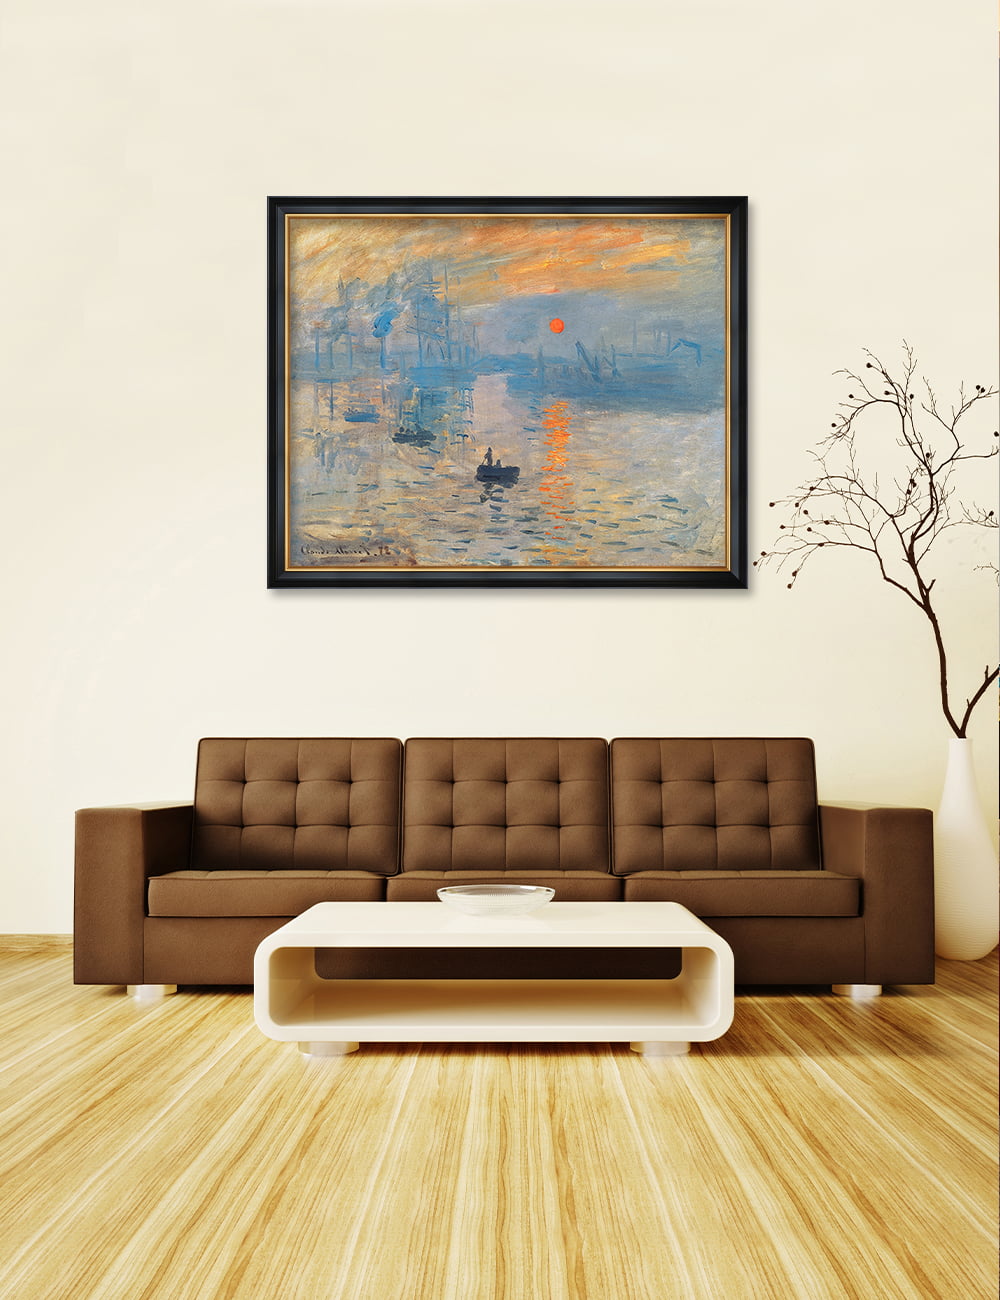 DECORARTS Impression Sunrise by Claude Monet Art Reproduction. Oversize  Solid Wooden Frame Matching with Giclee Prints Canvas Wall Art. Total size:  W 43